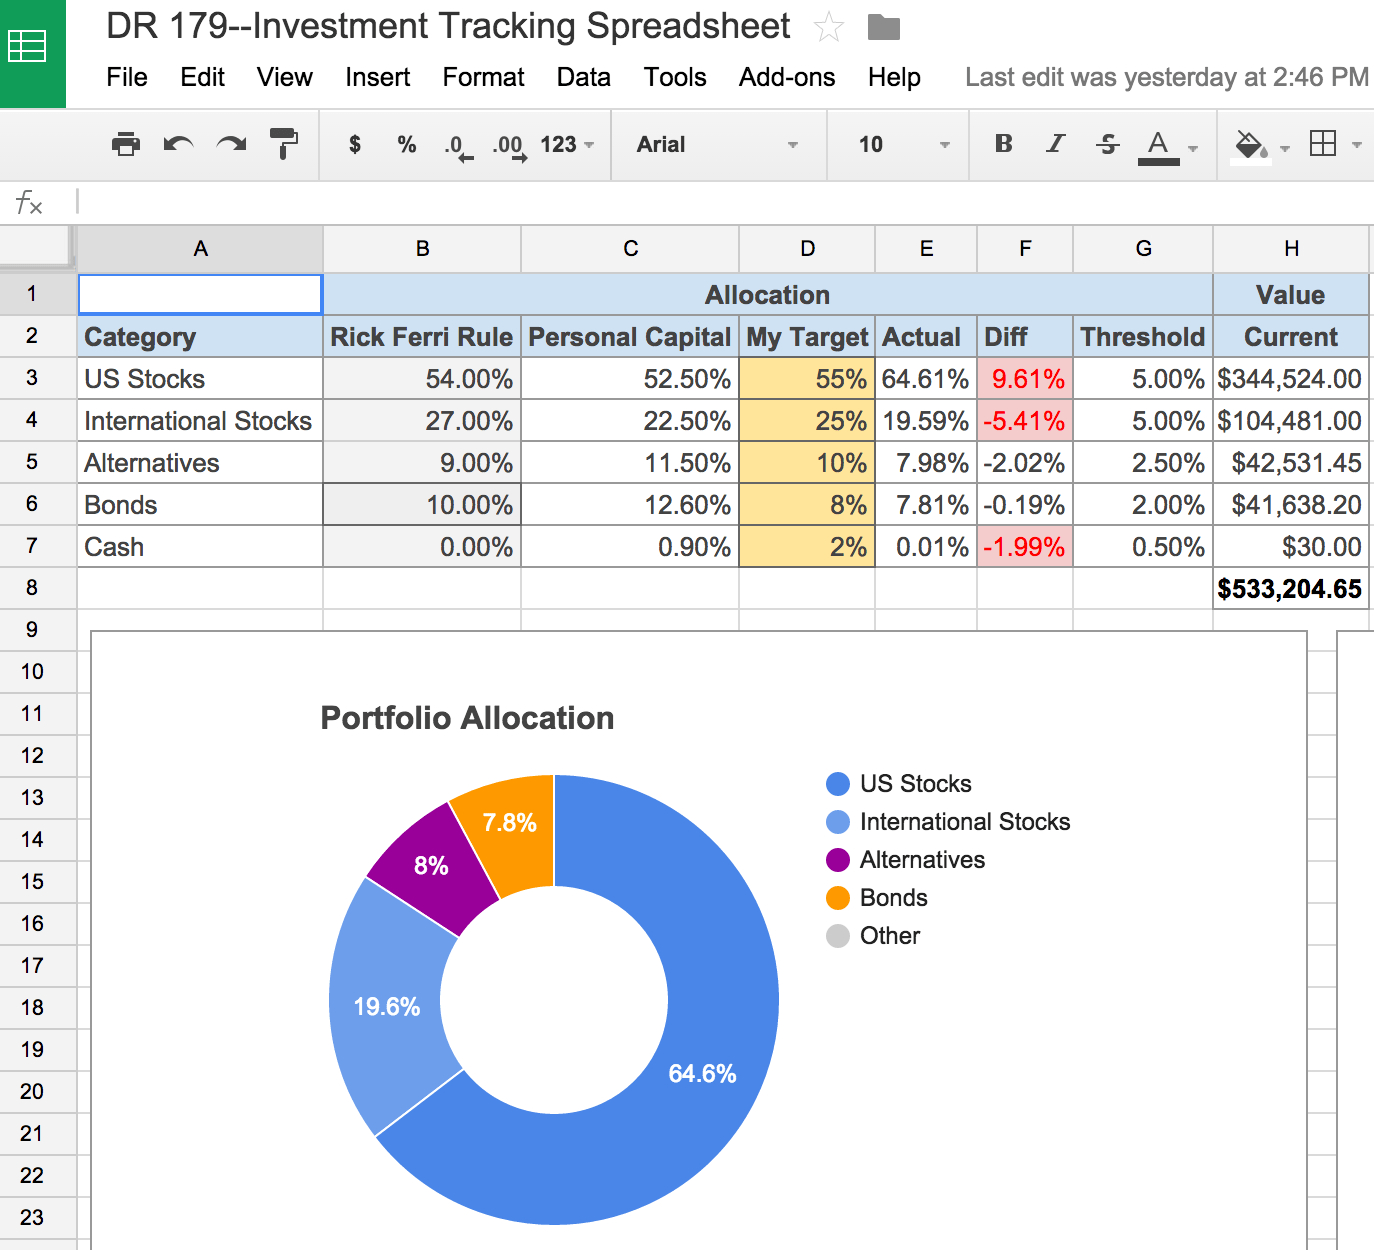 Stock Option Tracking Spreadsheet Regarding An Awesome And Free Investment Tracking Spreadsheet